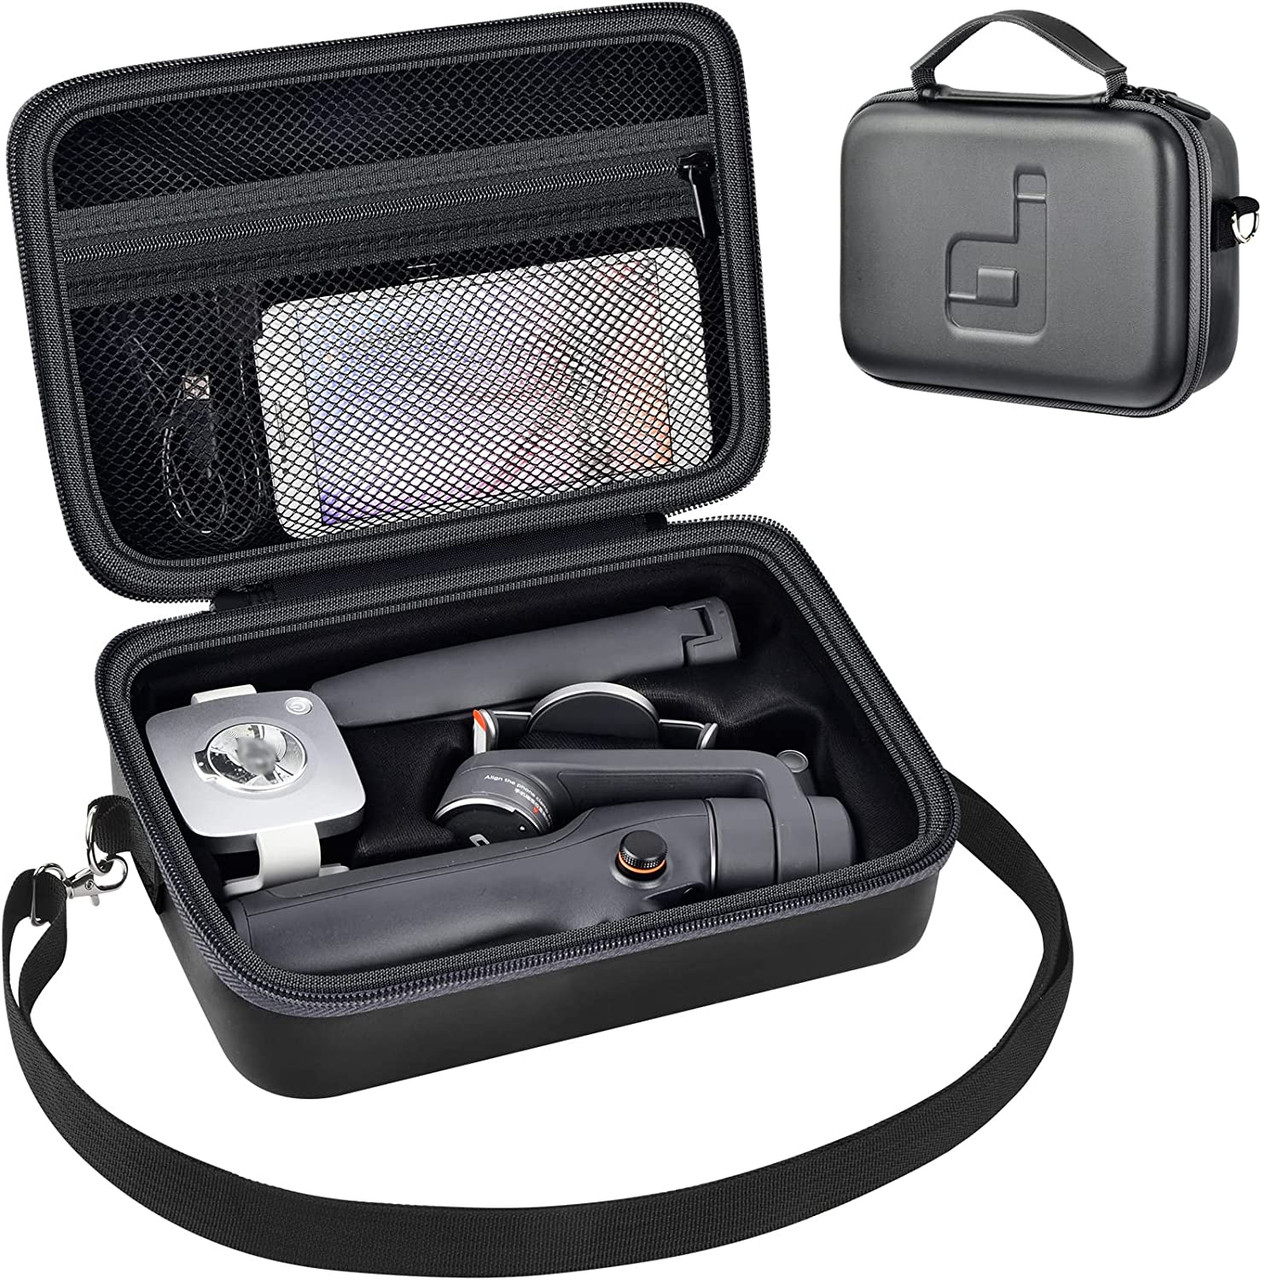 For DJI Osmo Mobile SE Shockproof Carrying Bag Portable Storage Case with  Handle - Grey Wholesale